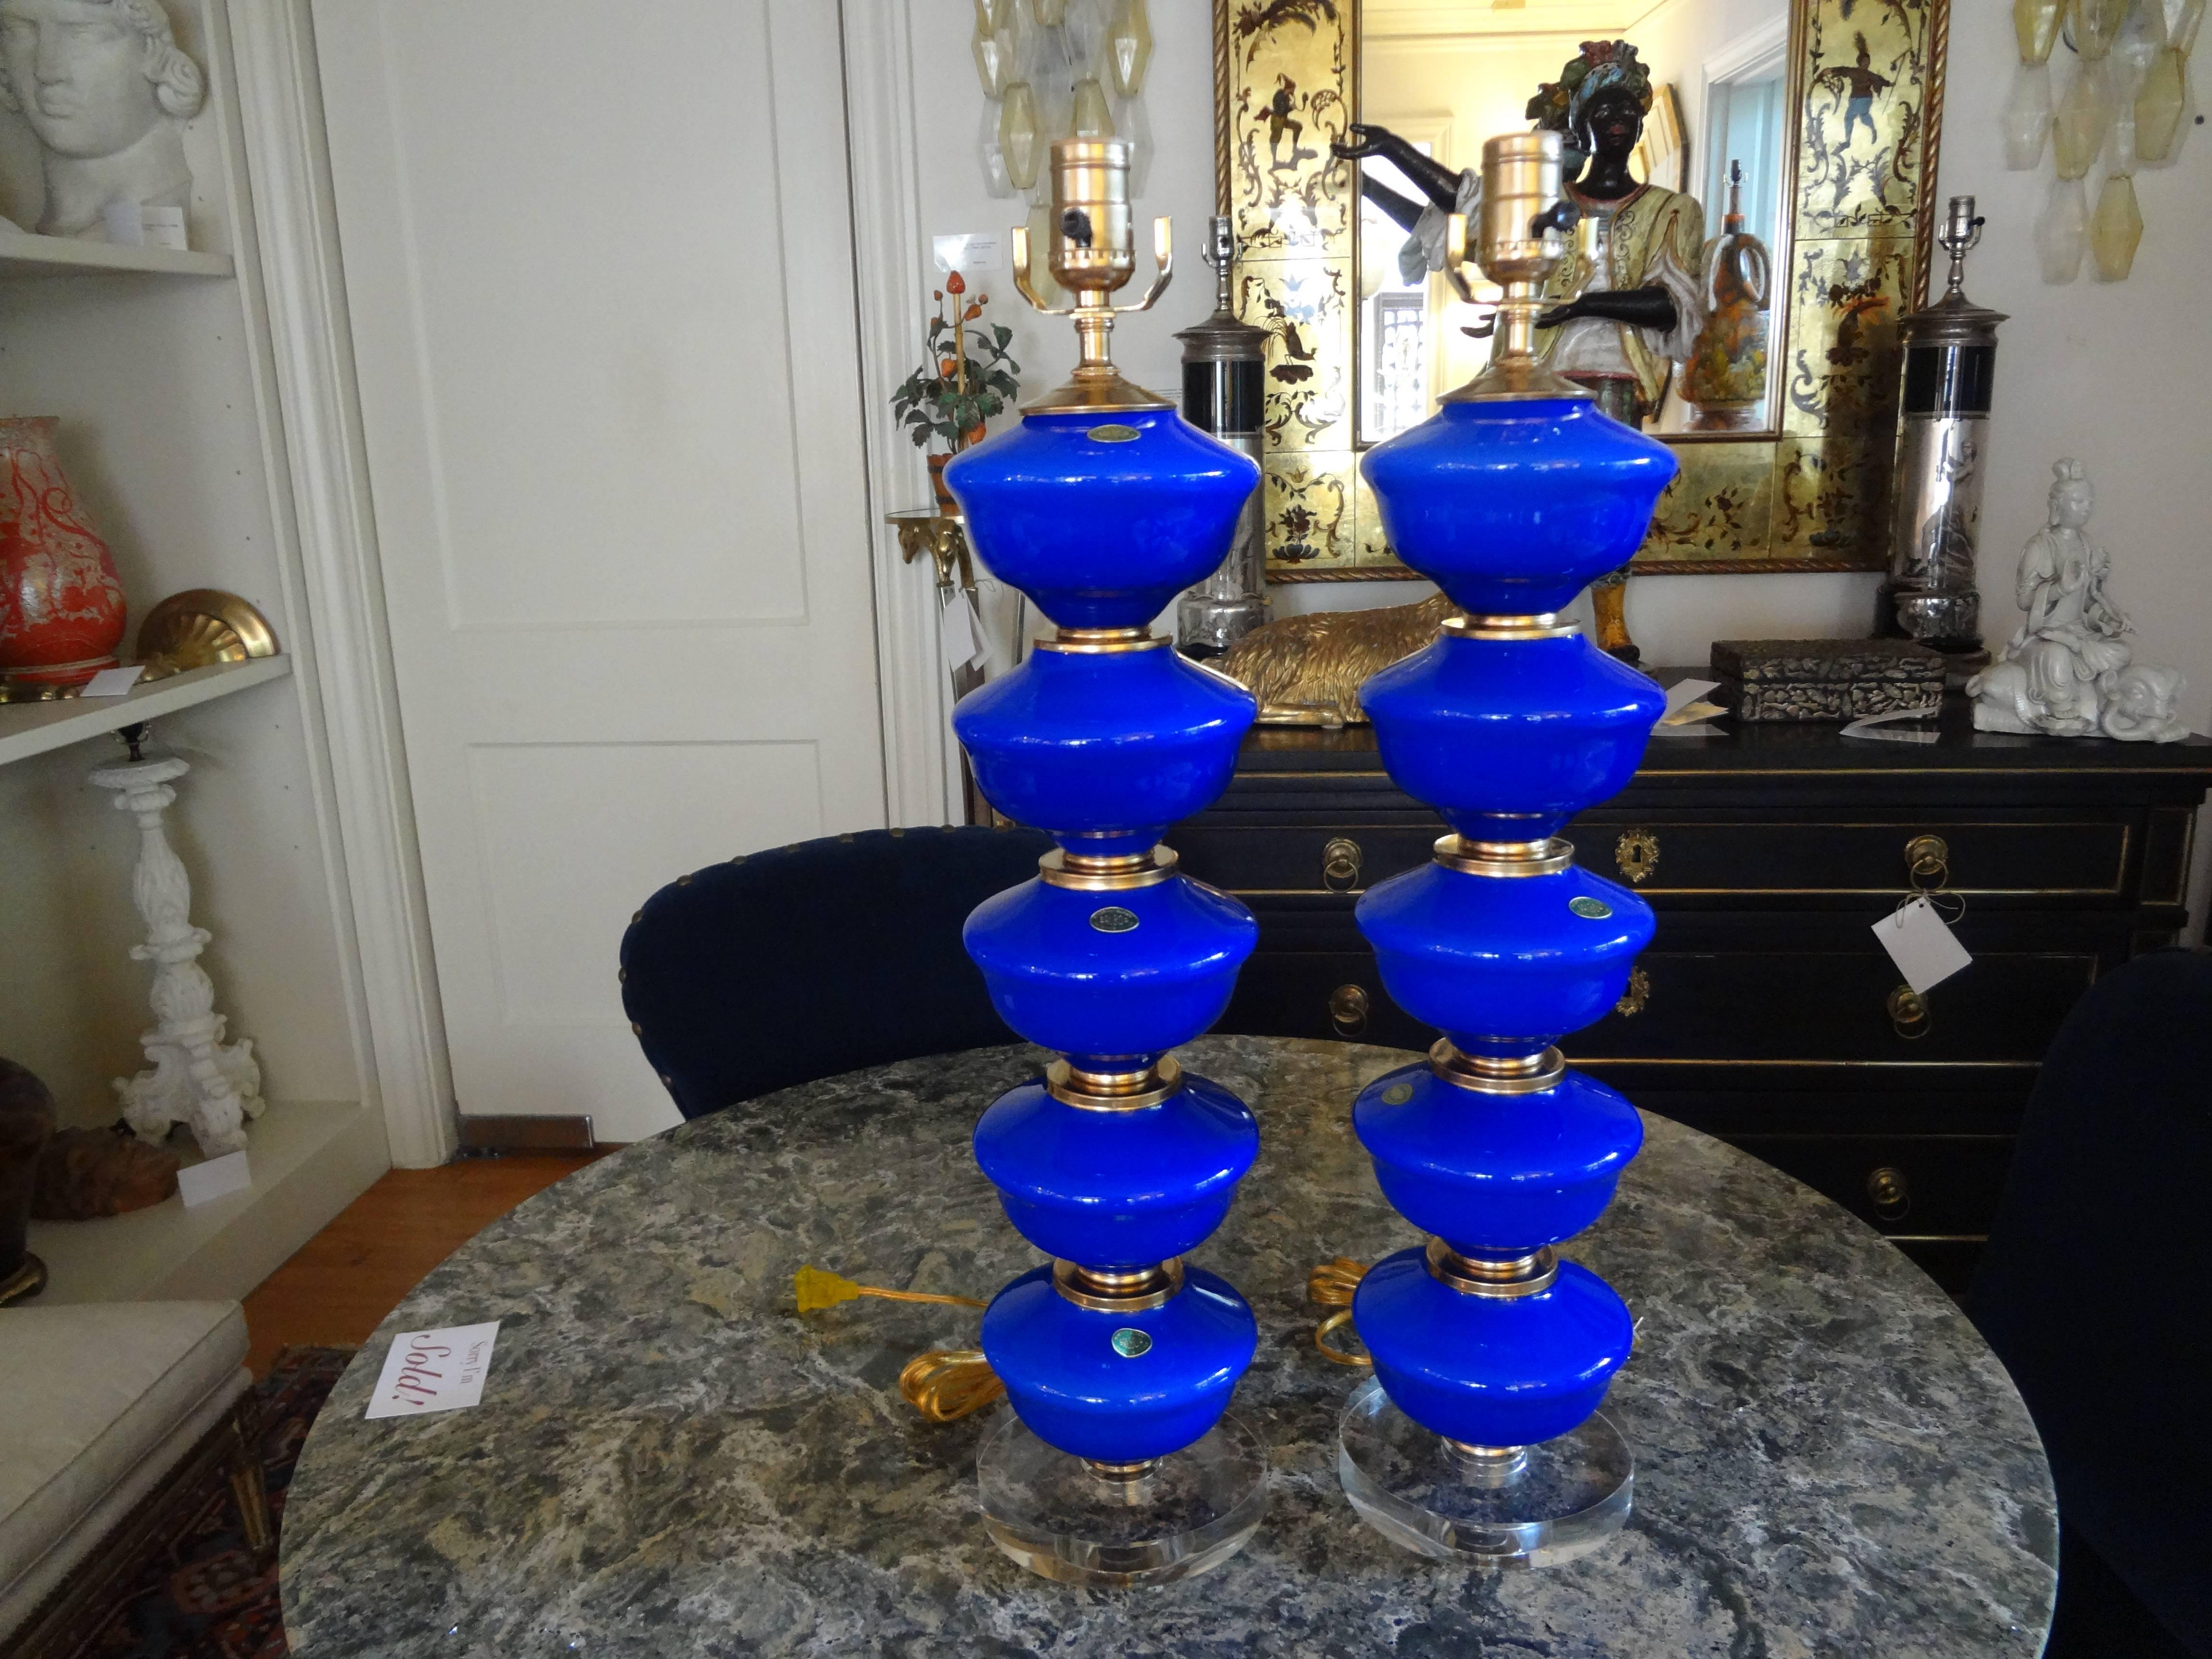 Great pair of vintage midcentury cobalt blue stacked ball Venetian glass lamps, circa 1960. Each sphere is separated with brass fittings. These stunning Italian table lamps are mounted on Lucite bases and are newly wired for the U.S. Market. Retain